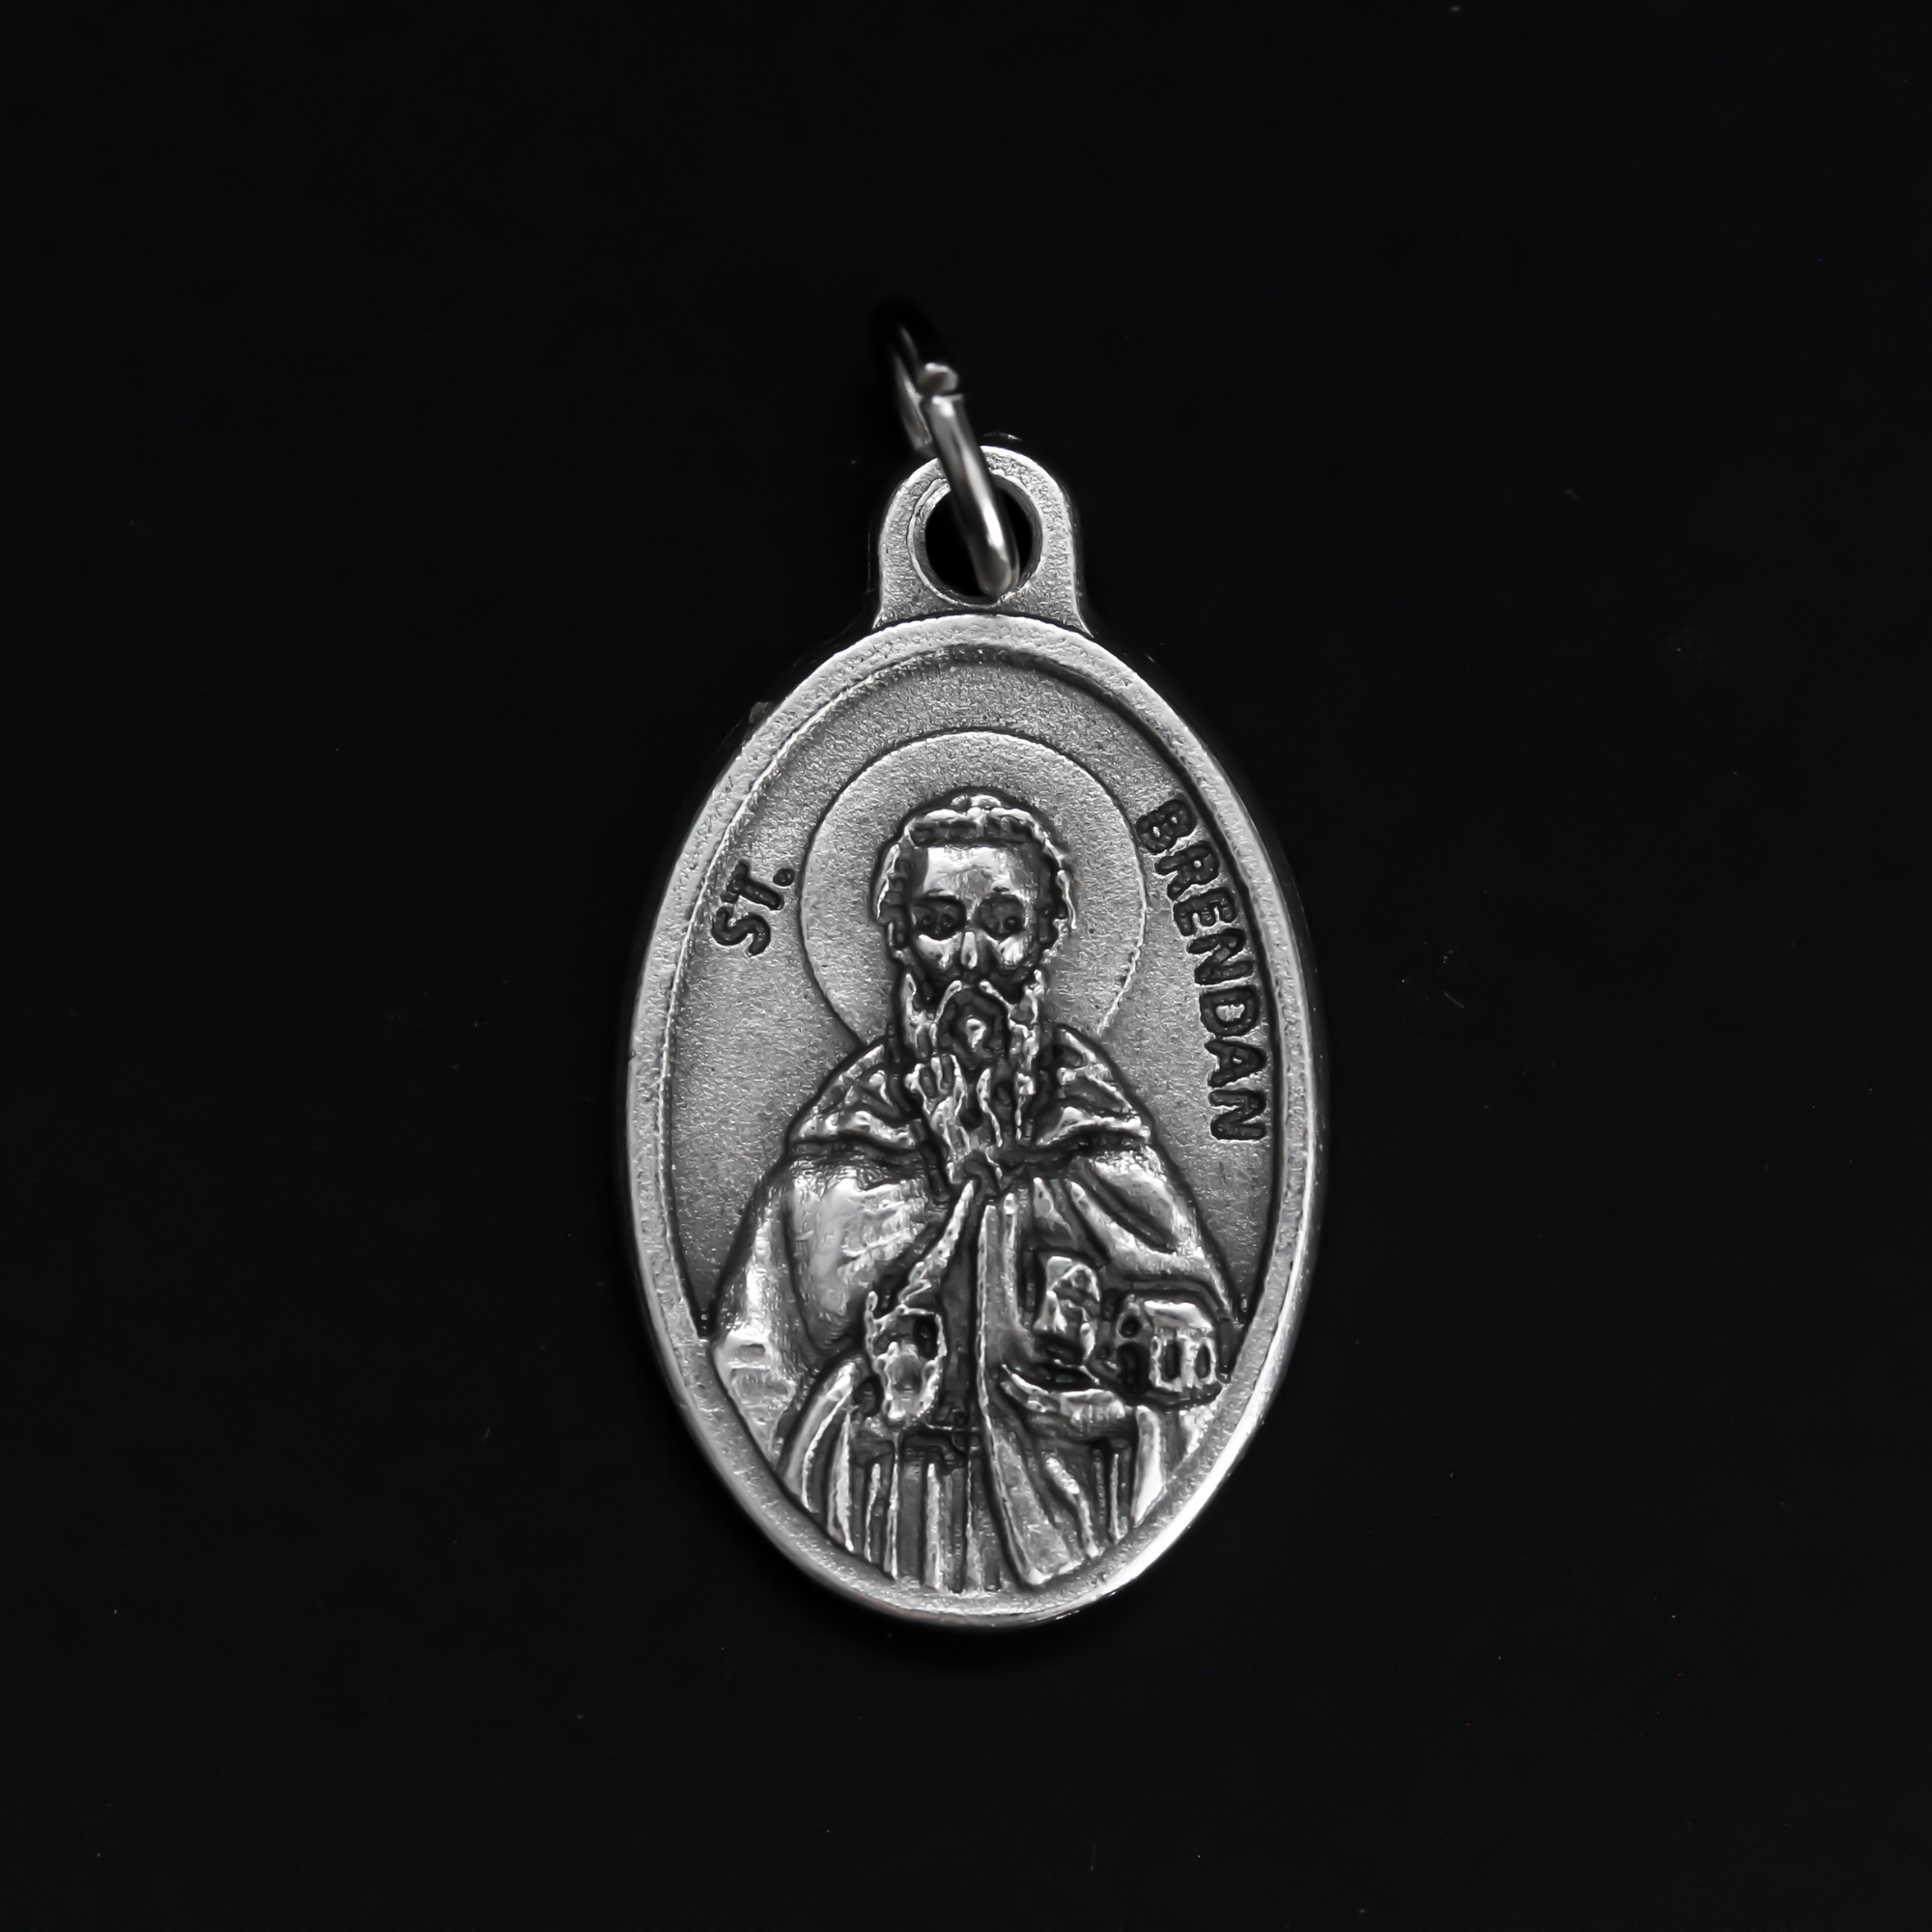 Saint Brendan of Clonfert medal that depicts the saint on the front and "Pray For Us" on the back